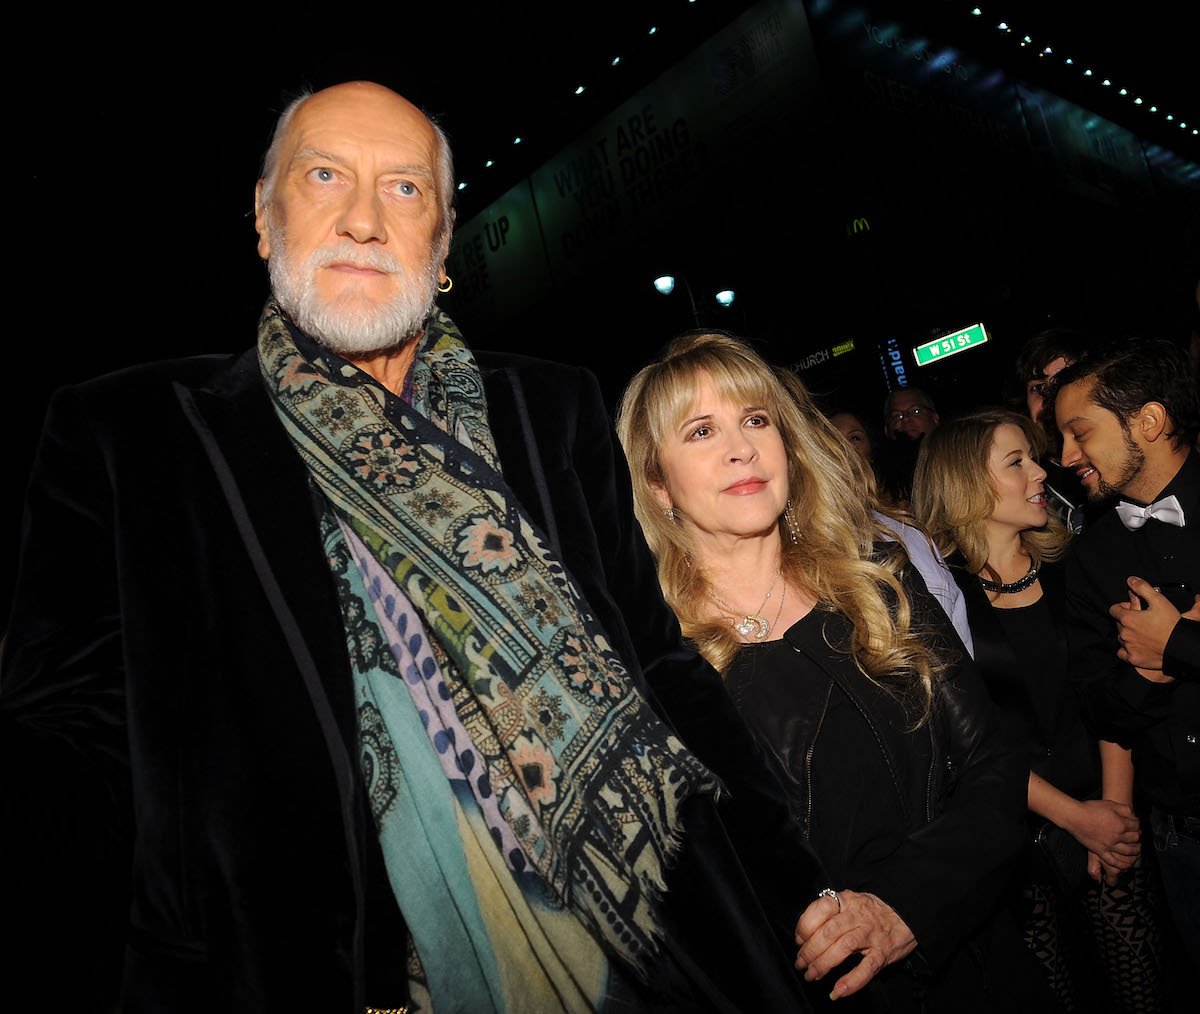 Mick Fleetwood and Stevie Nicks, who had an affair while touring with Fleetwood Mac, walk through a crowd together.